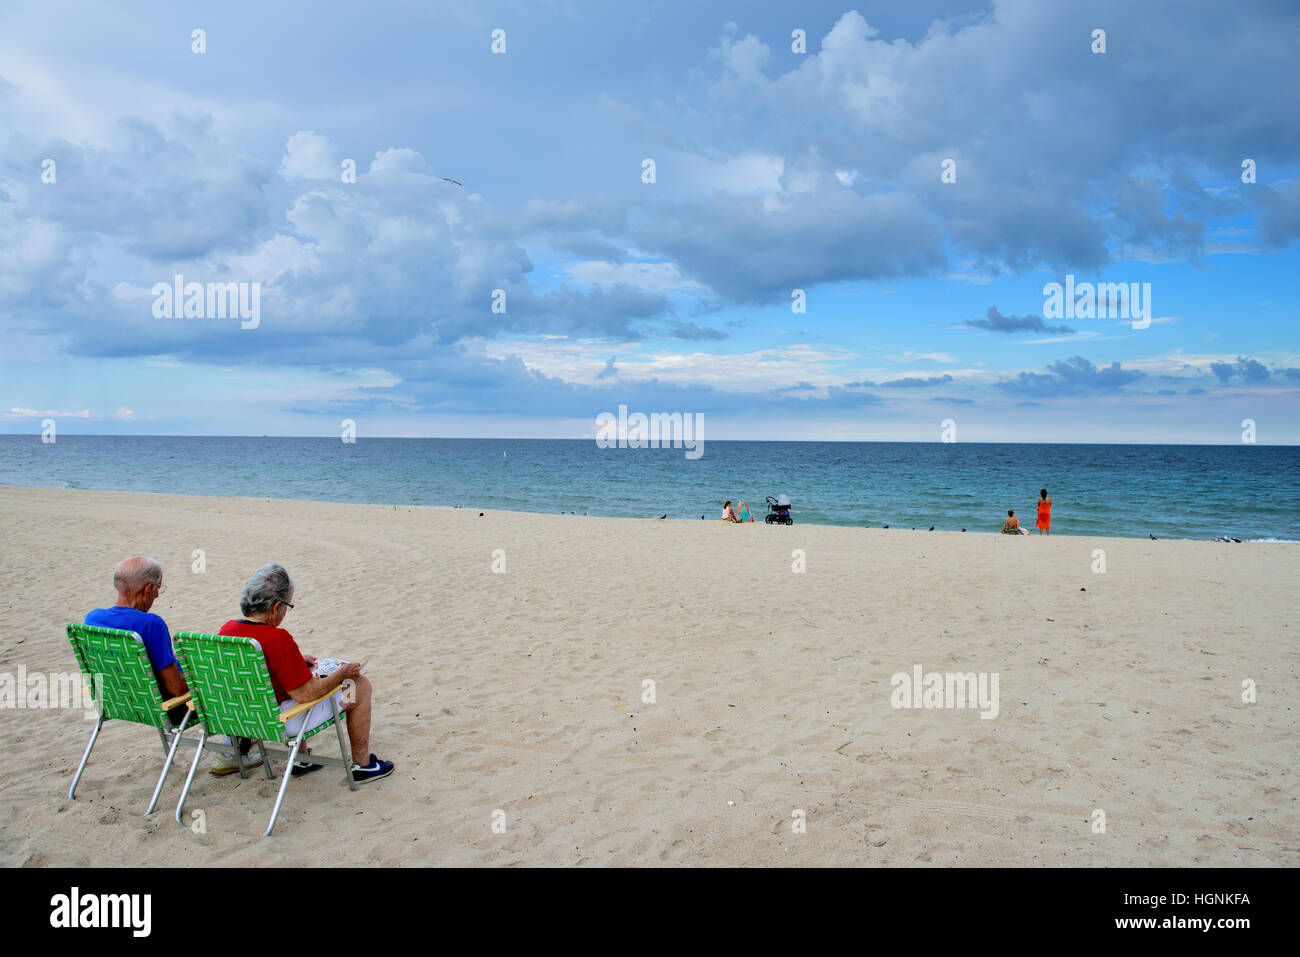 Older couple sitting on lounge chairs by sea and sandy beach Stock Photo